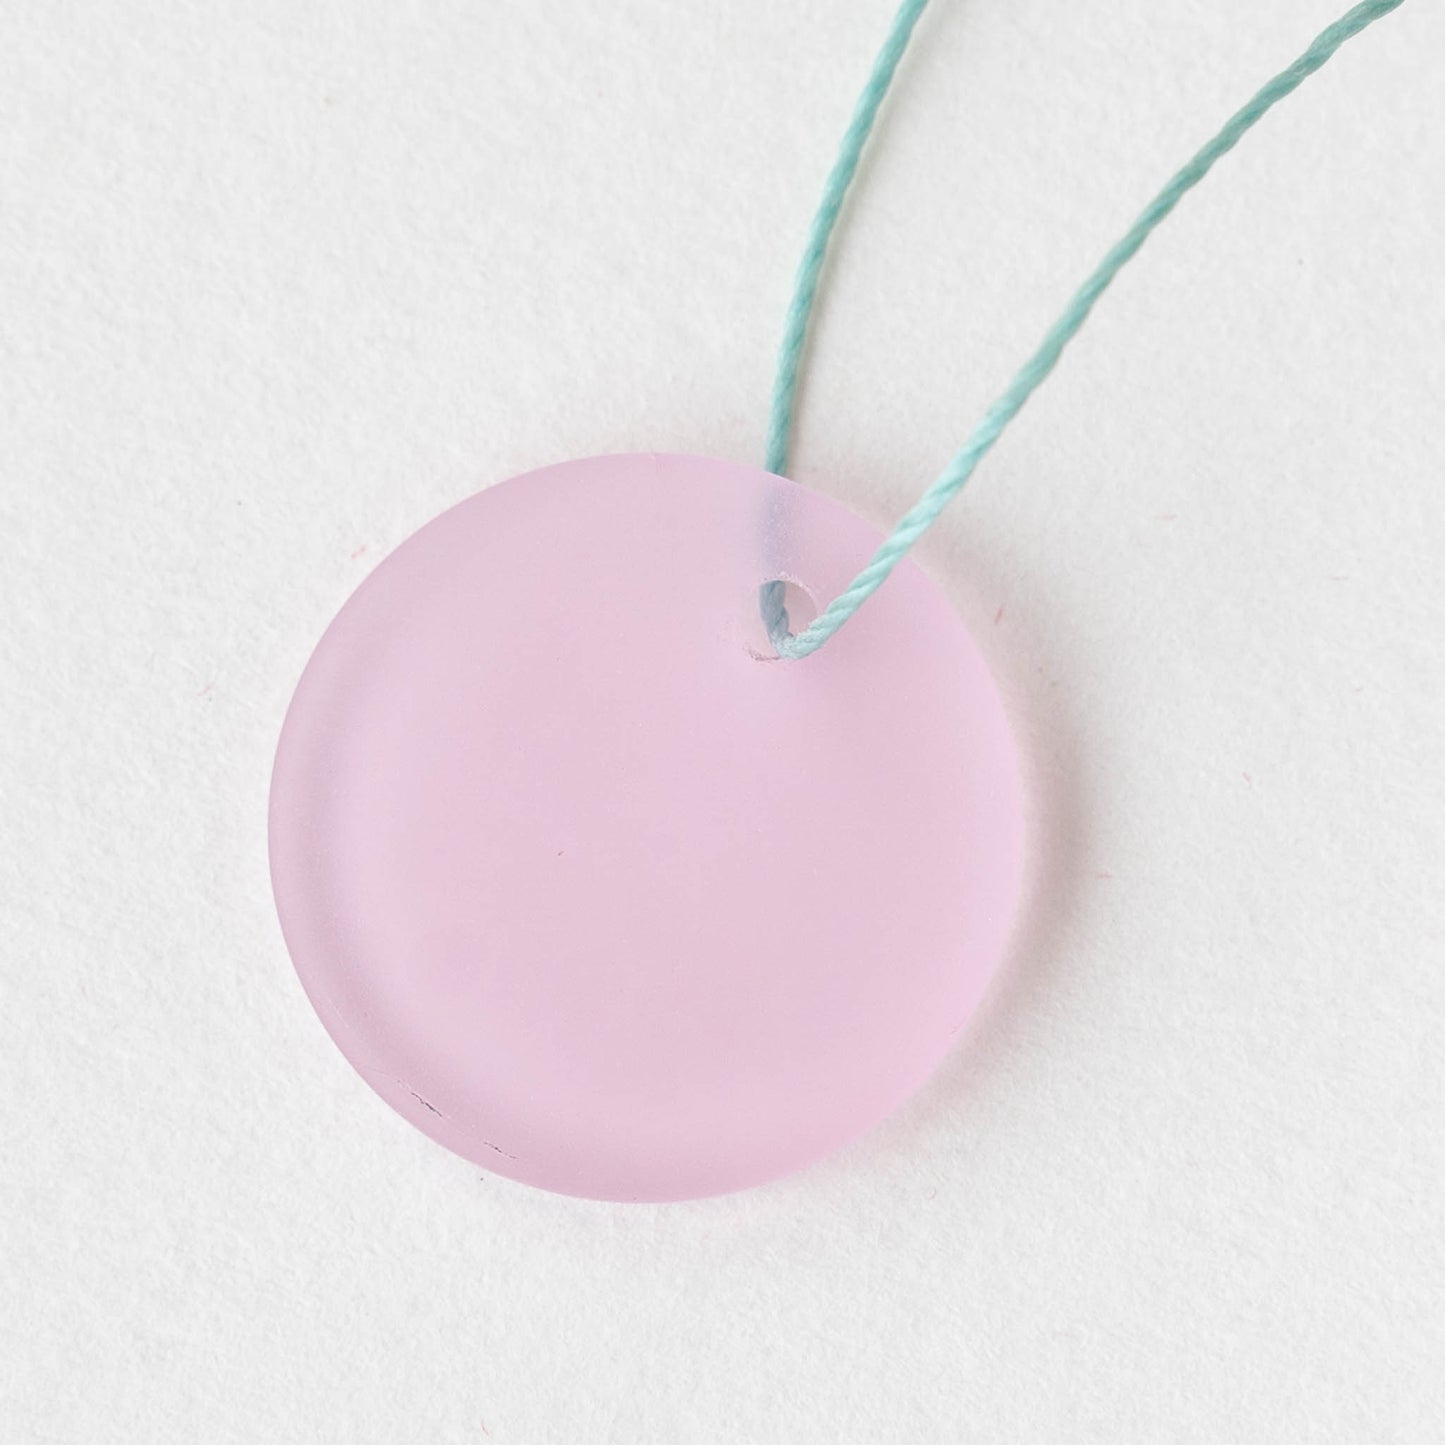 25mm Frosted Glass Coin Pendant - Pink - 2 or 6 Beads